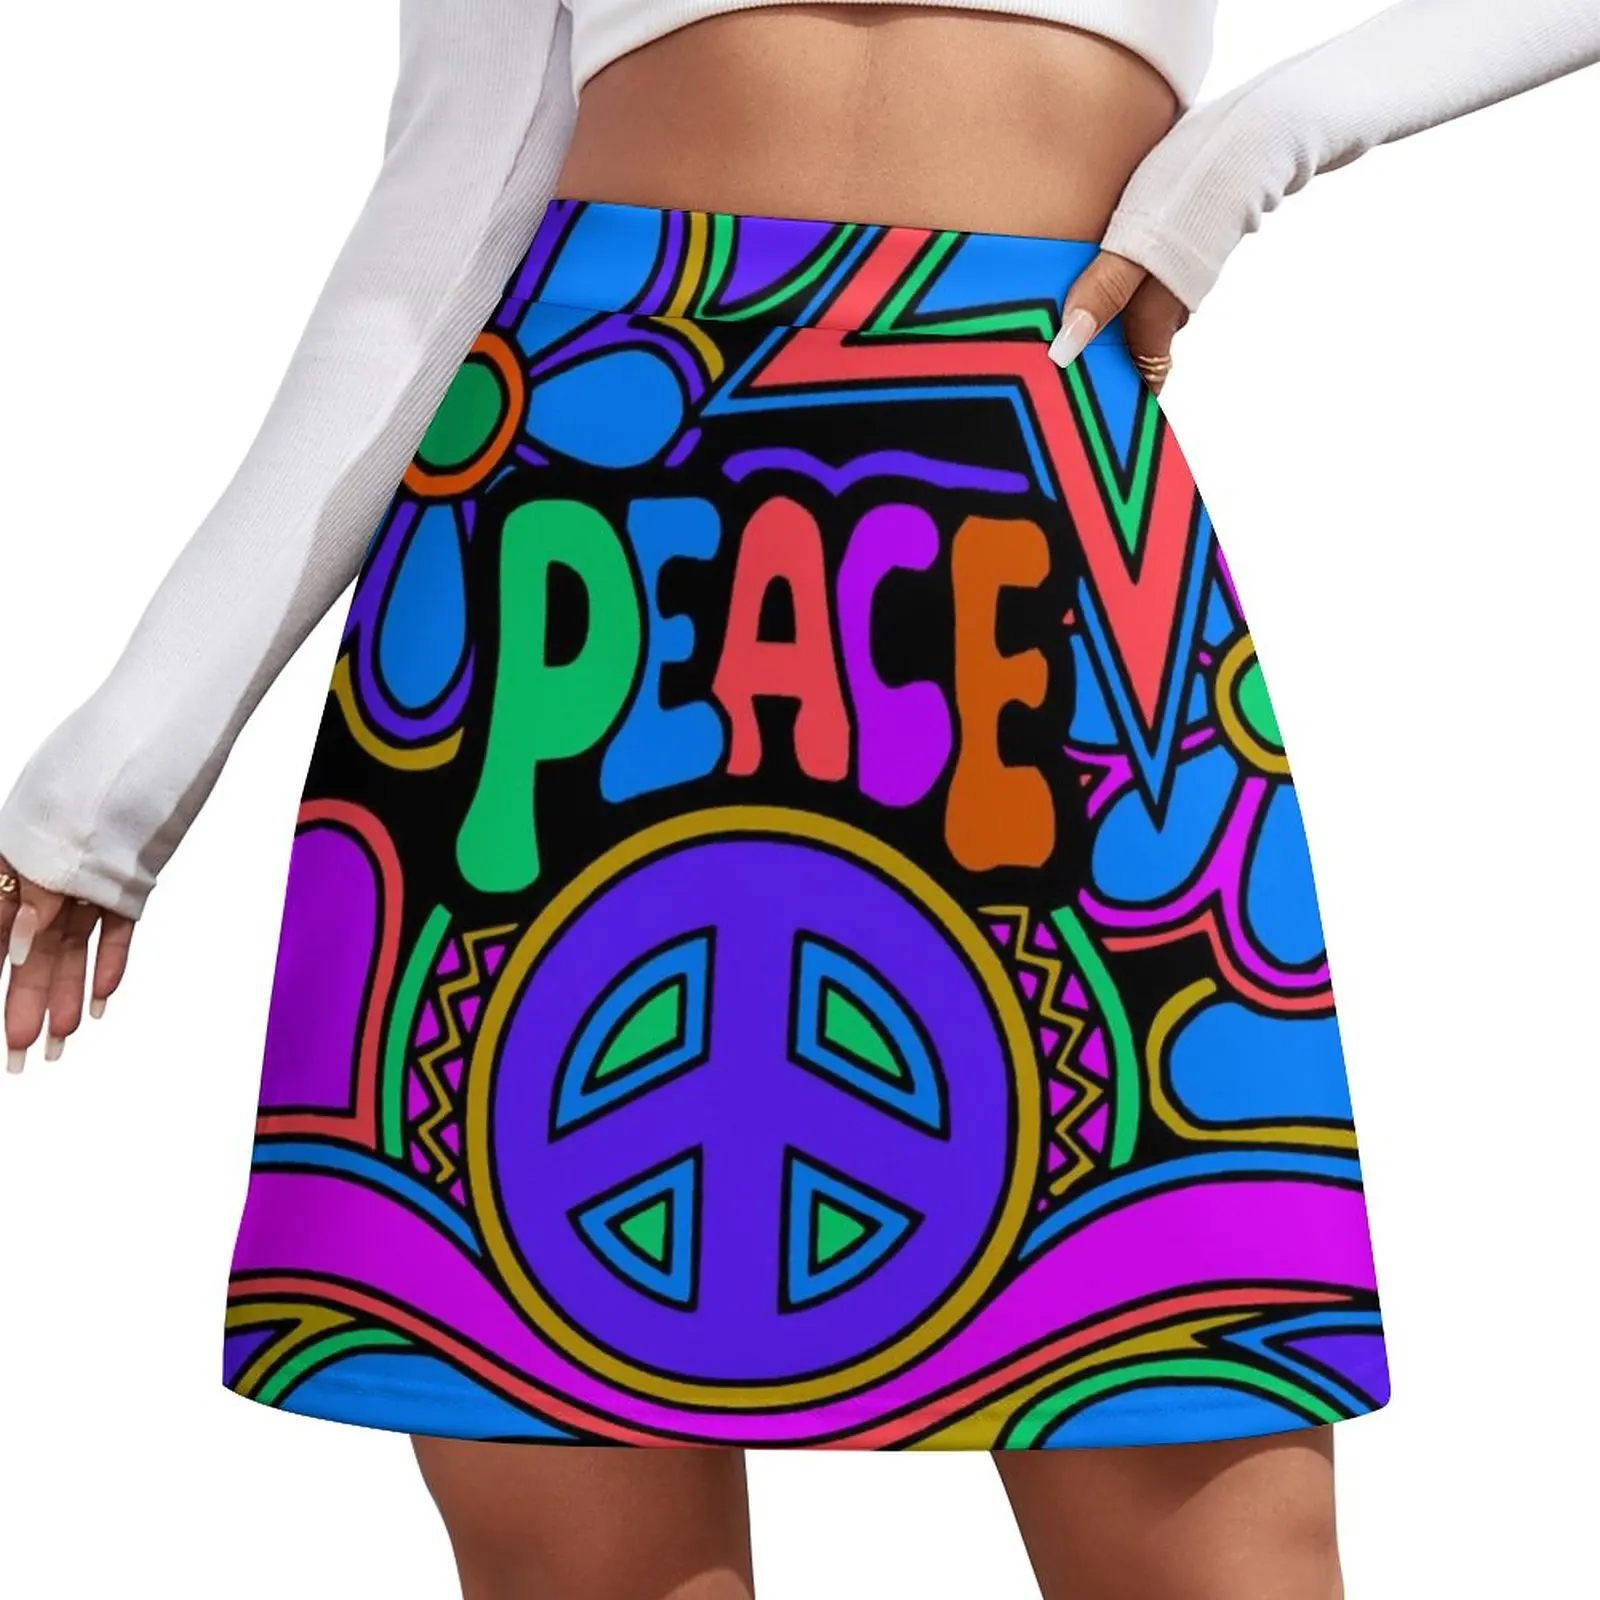 Peace and Love Flowers and Stars Hippie Design Mini Skirt Female clothing Short skirt woman